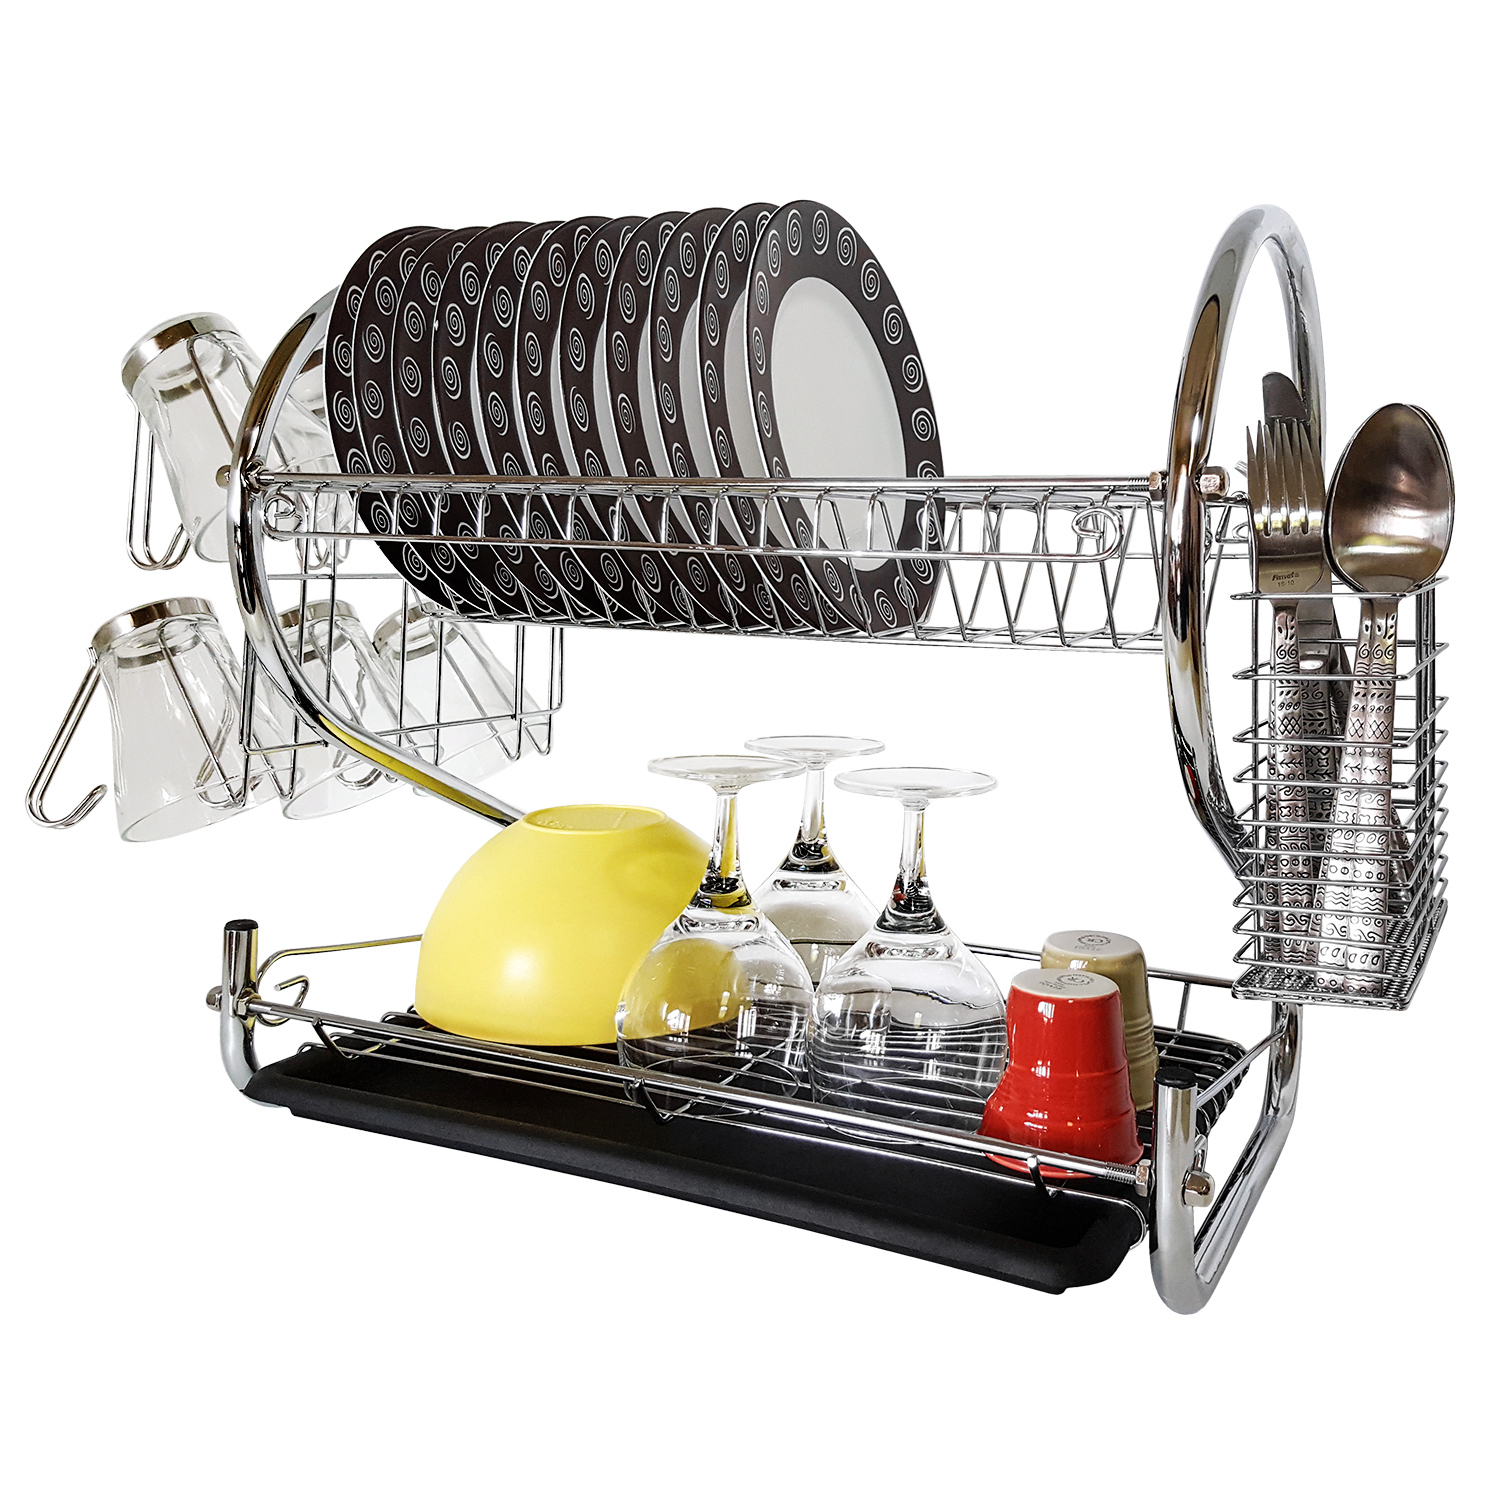 Wine Rack Drainer Aluminum Rust Proof Kinoto Dish Rack Drying Kitchen Collapsible with Tray